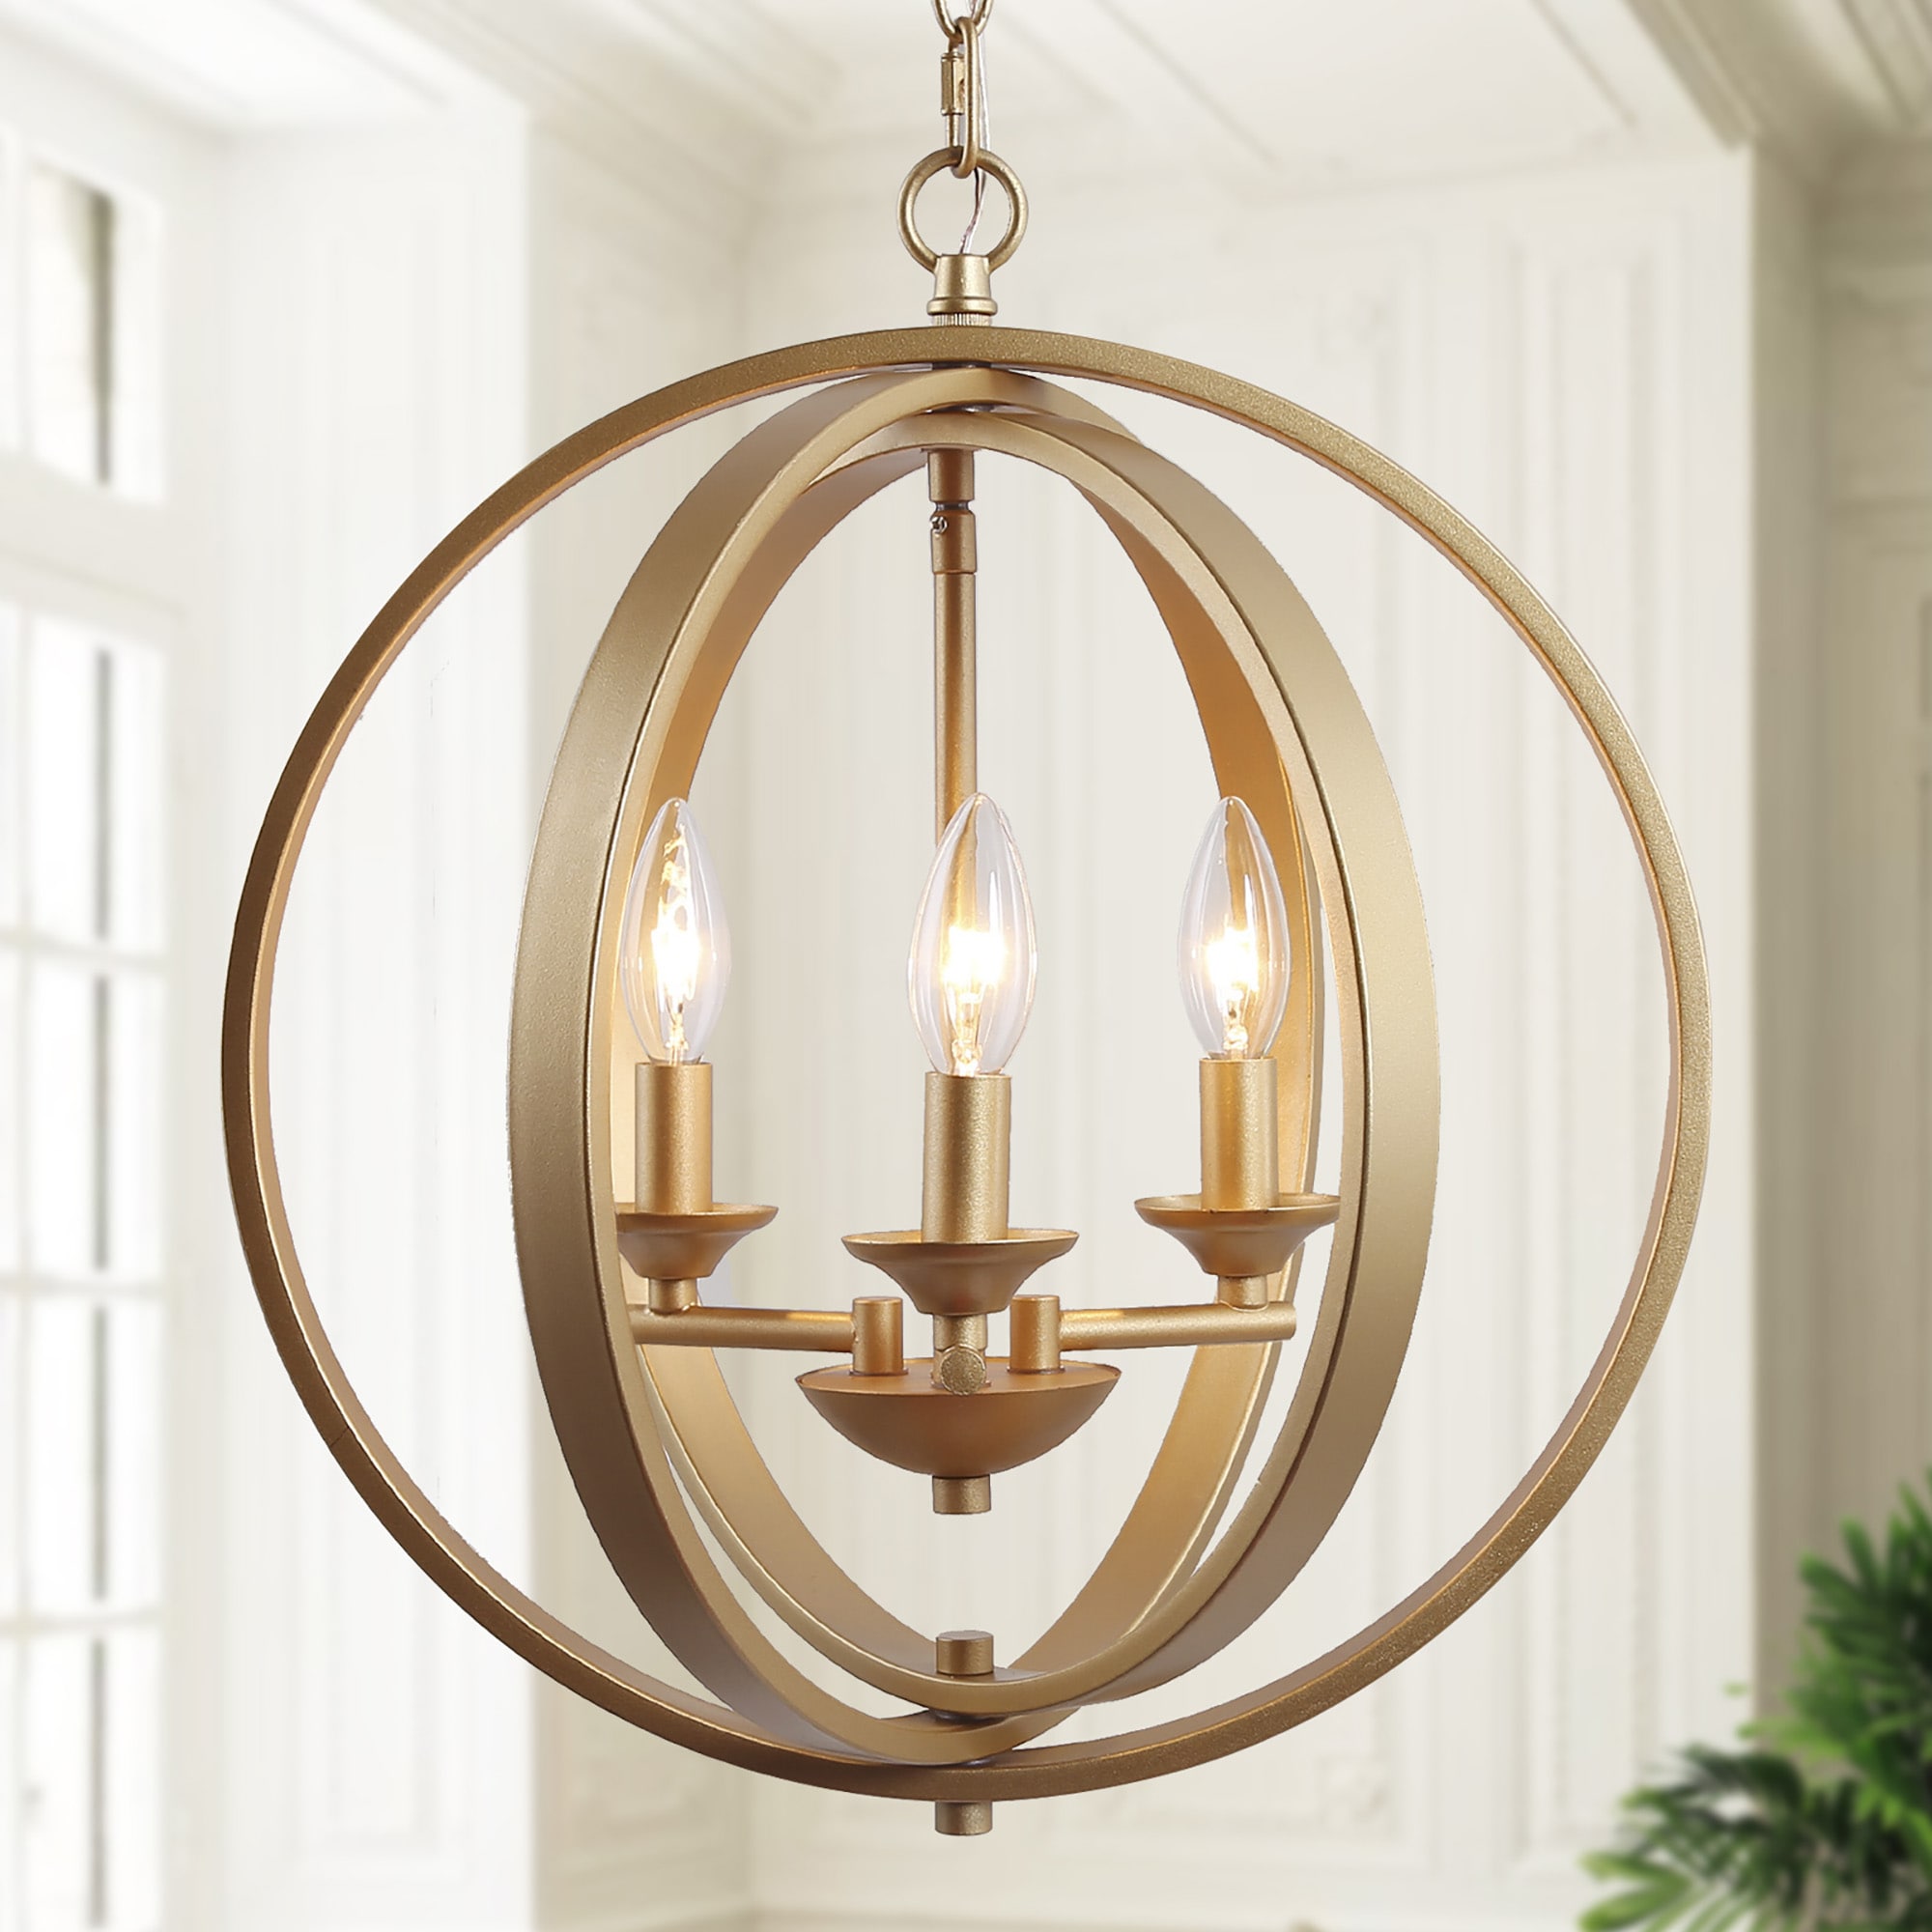 Uolfin 3-Light Gold Globe with Style LED Candle department Classic the at rated Chandelier in Modern/Contemporary Chandeliers Dry